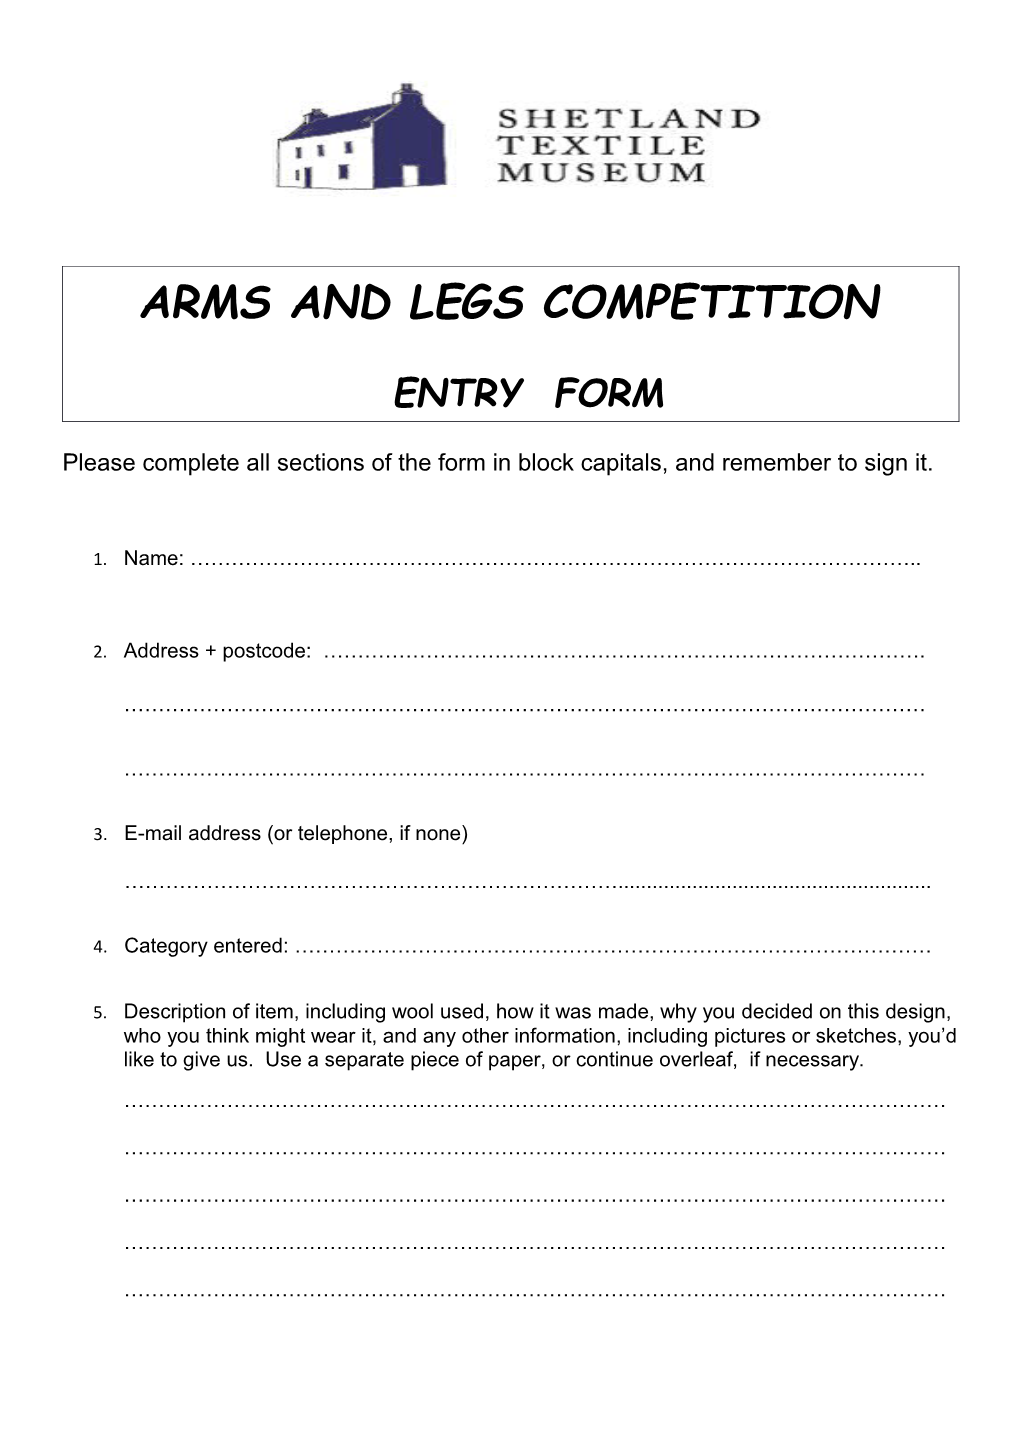 Arms and Legs Competition